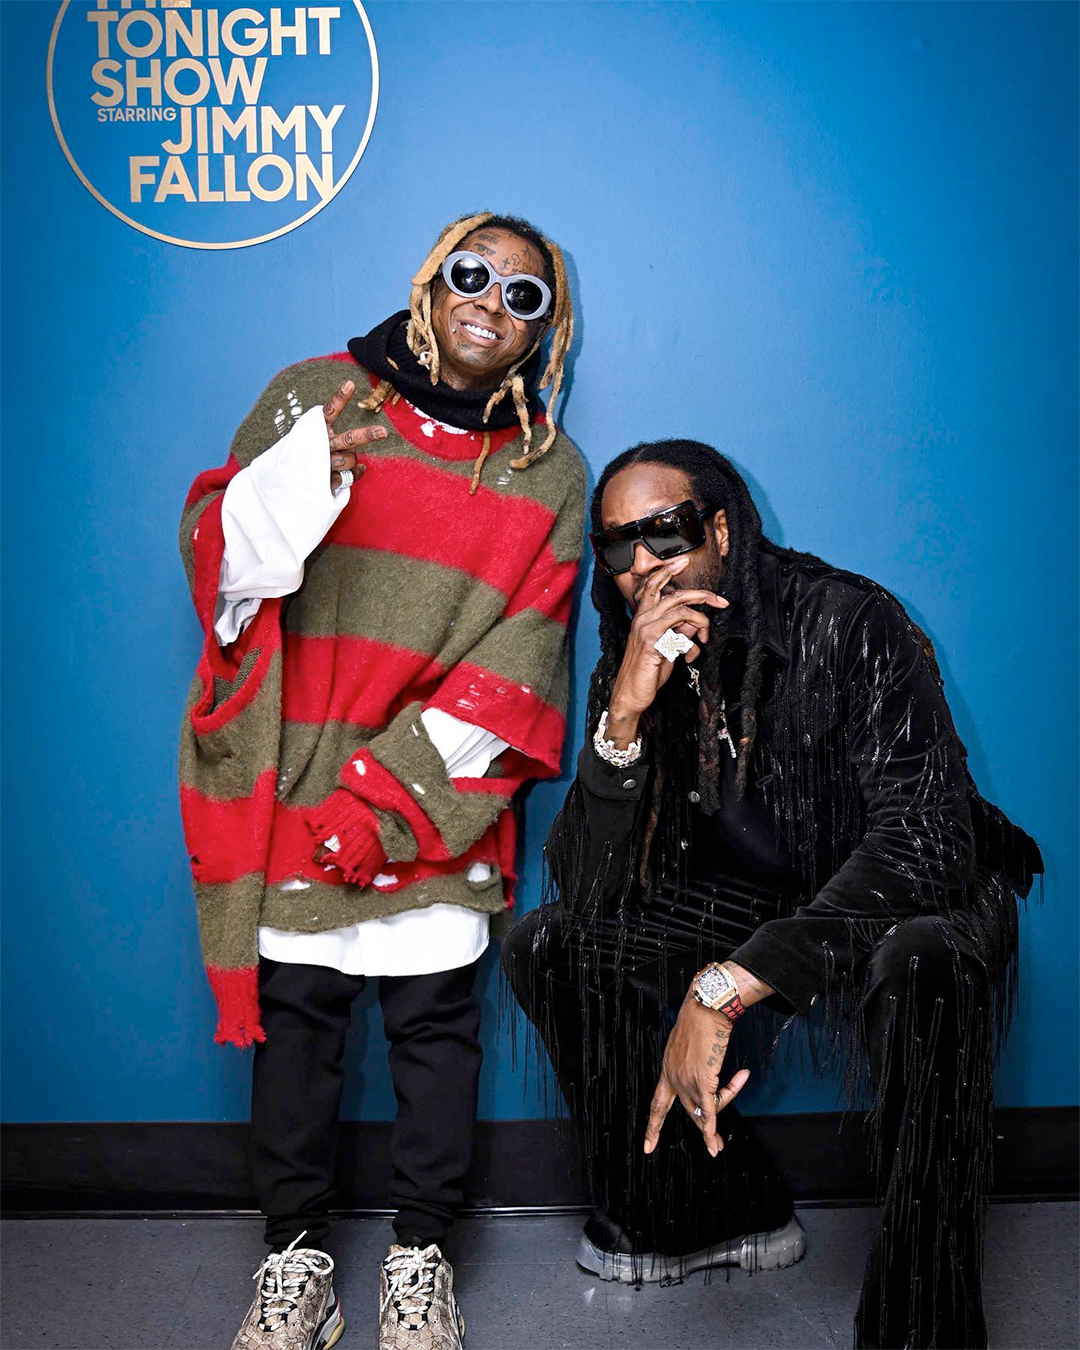 2 Chainz & Lil Wayne Perform Presha Live + Sit Down For An Interview On The Tonight Show